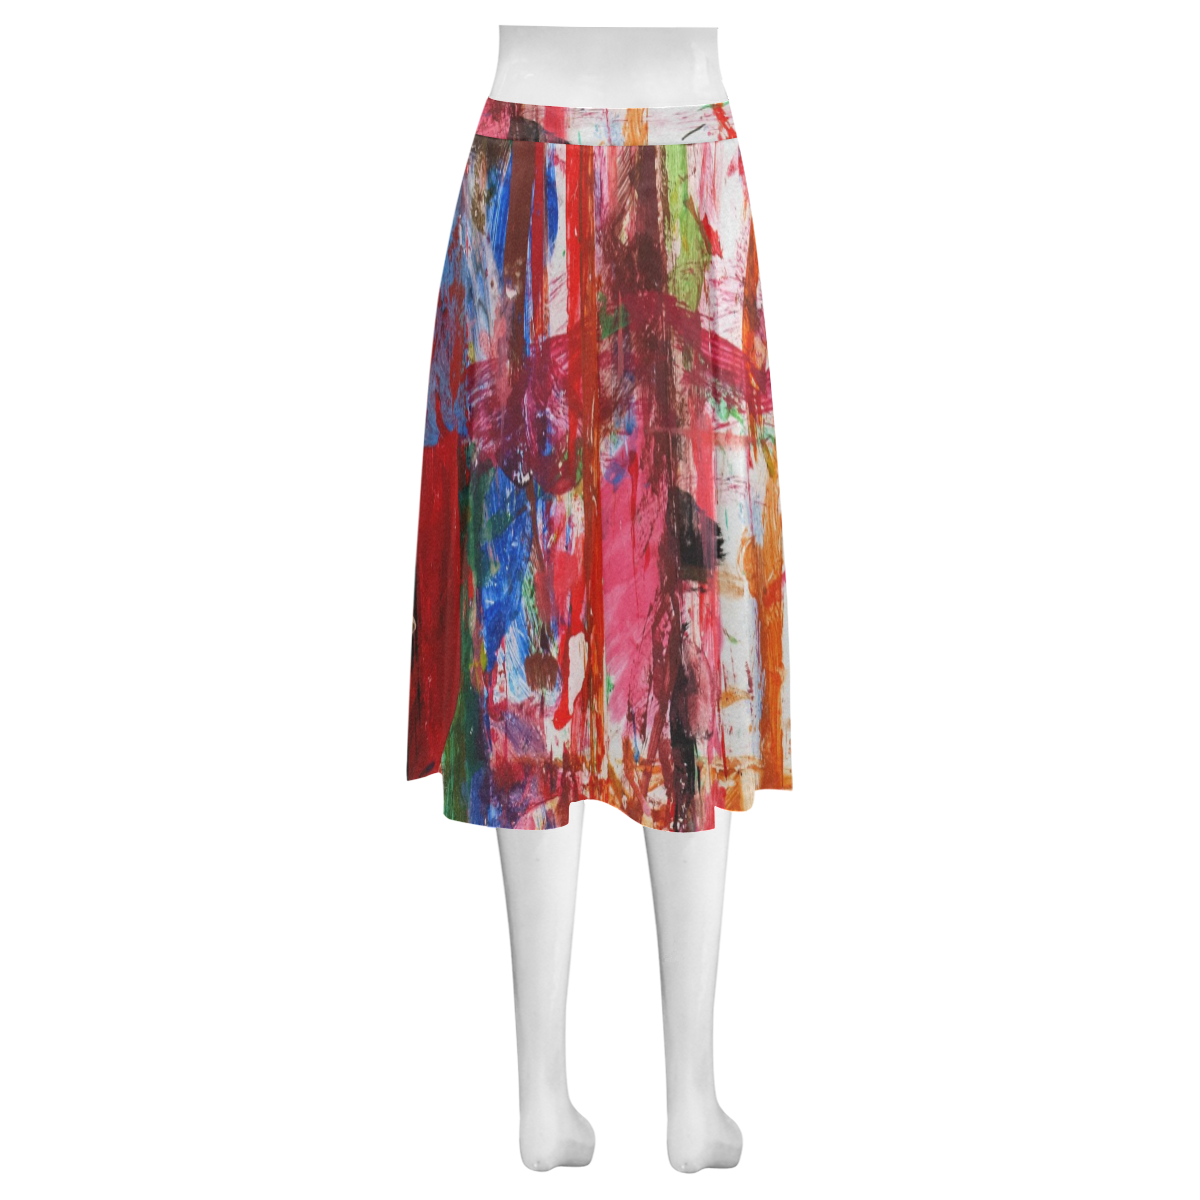 Paint on a white background Mnemosyne Women's Crepe Skirt (Model D16)